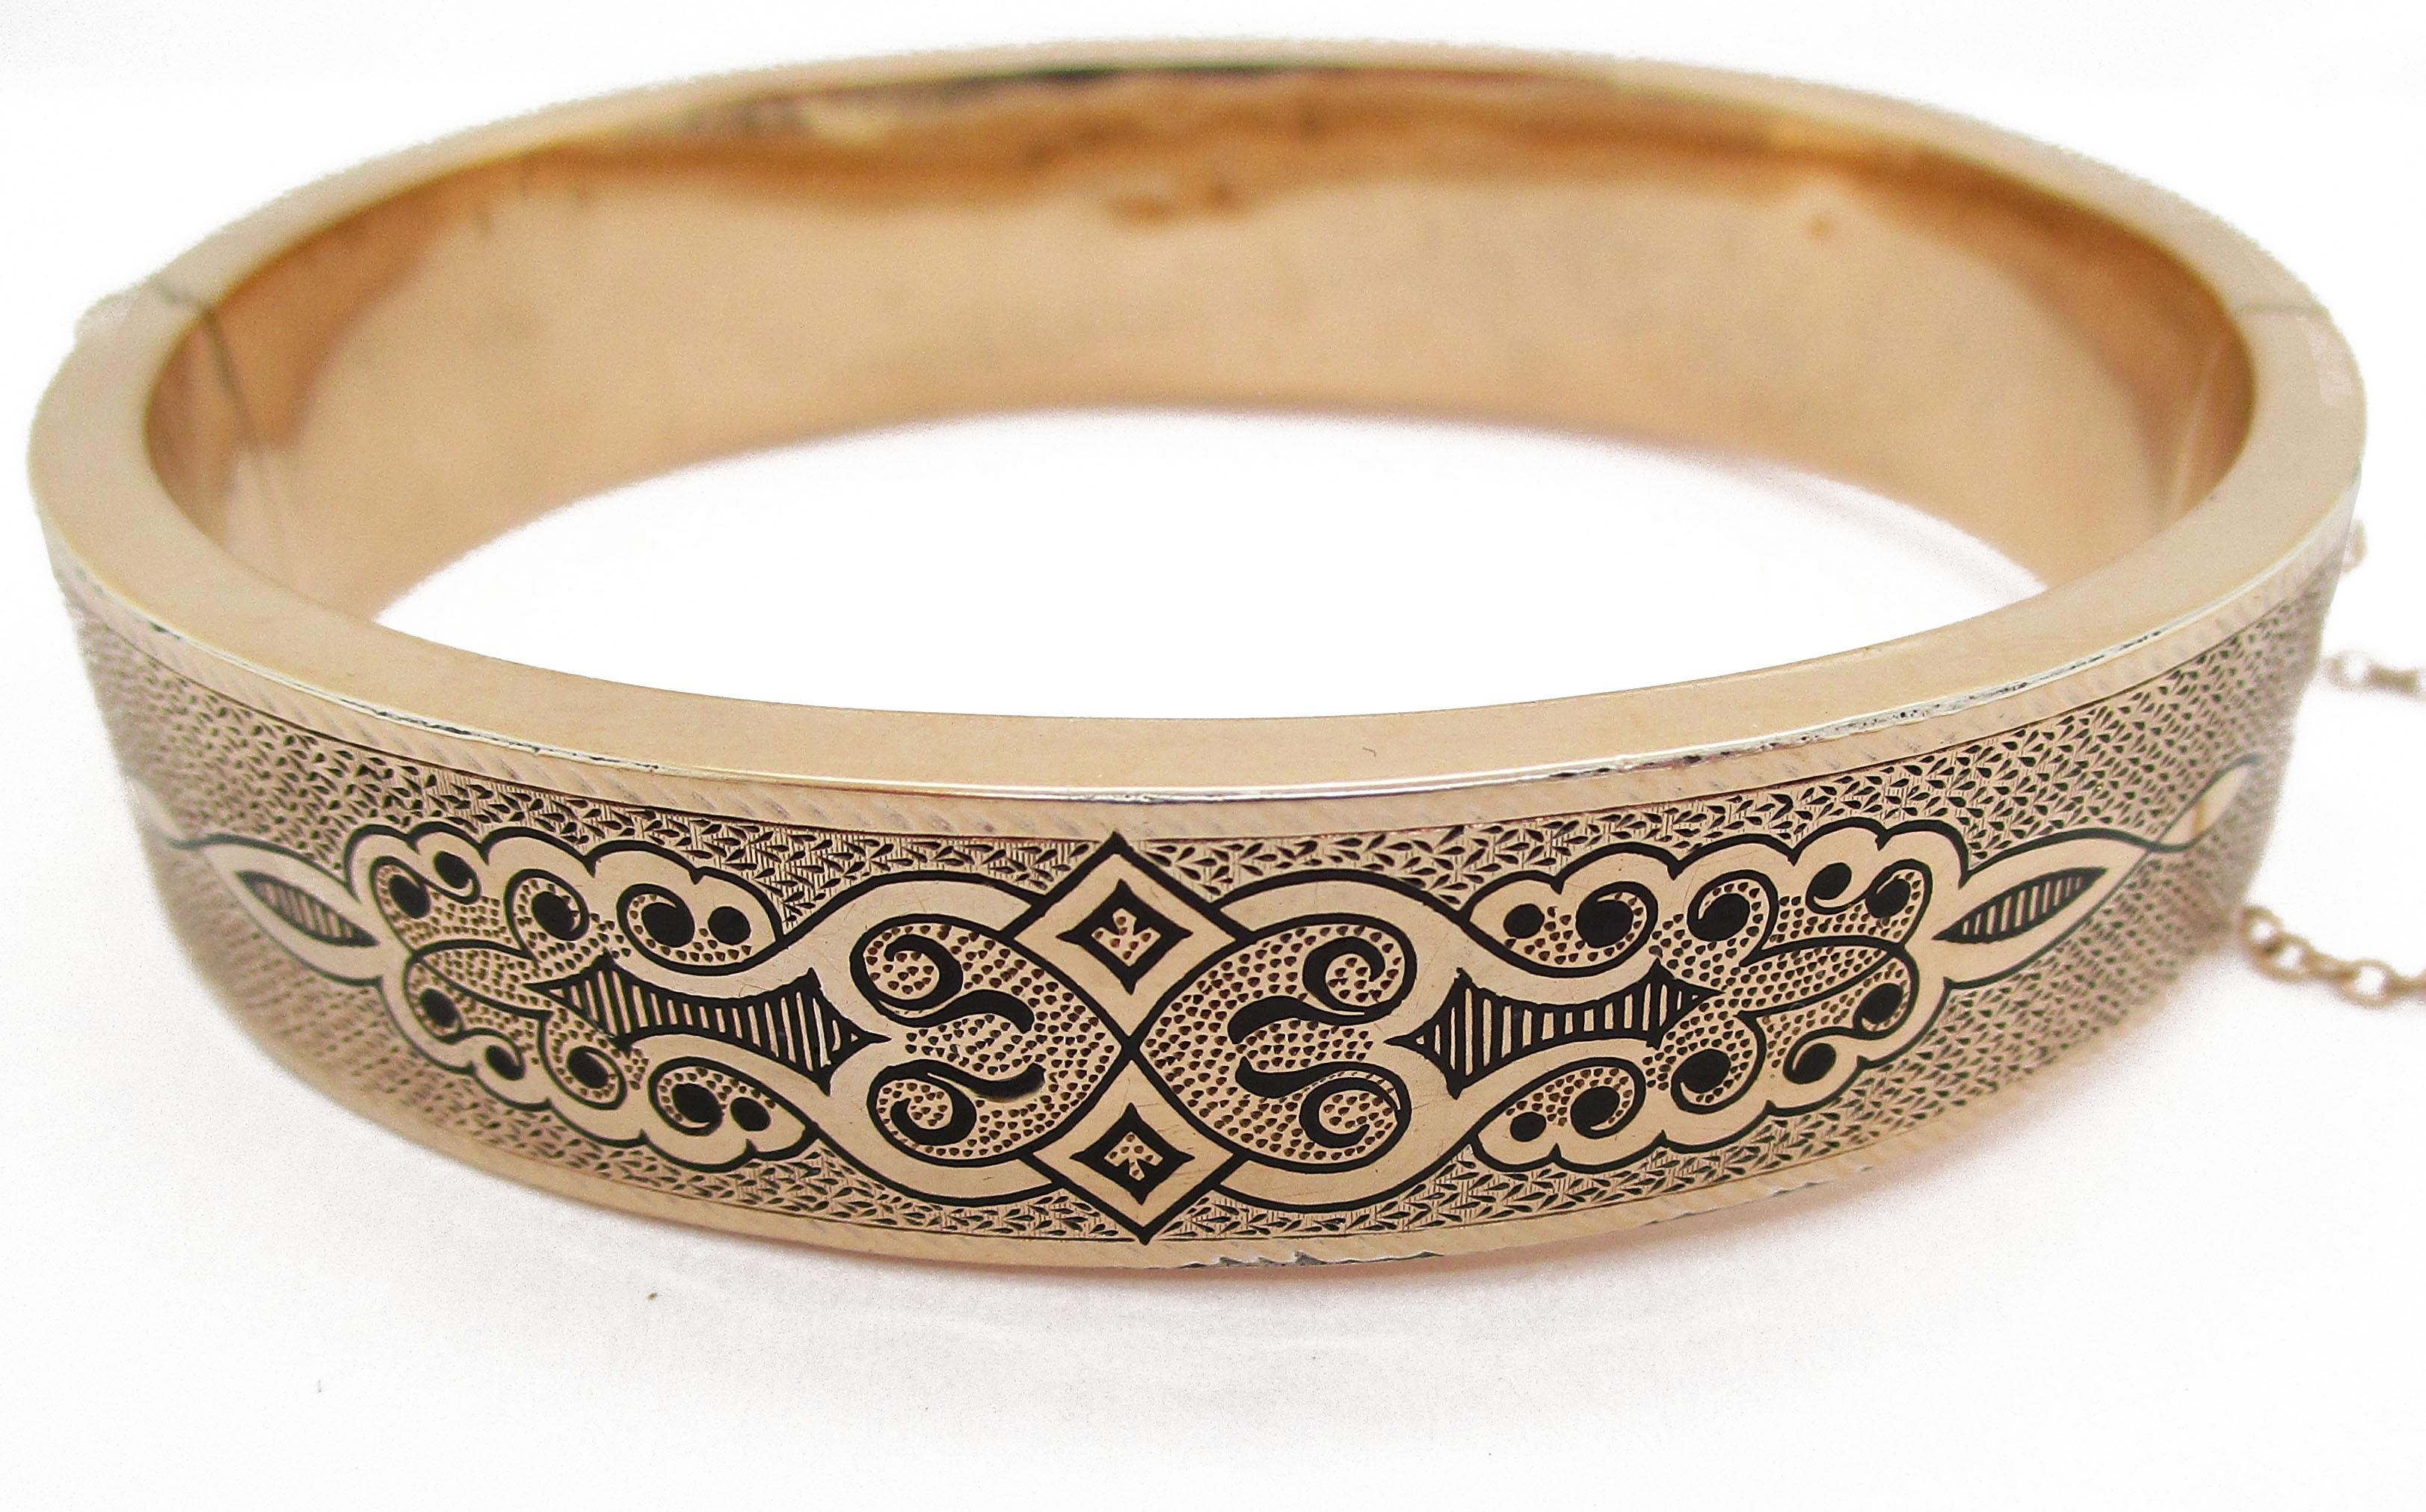 This stunning hinged Victorian bangle is in gorgeous 18k rose gold decorated with fine enameled details. With its wide, linear pattern, this bracelet makes a statement sitting on almost any wrist. The intricate, swooping enamel details add a touch